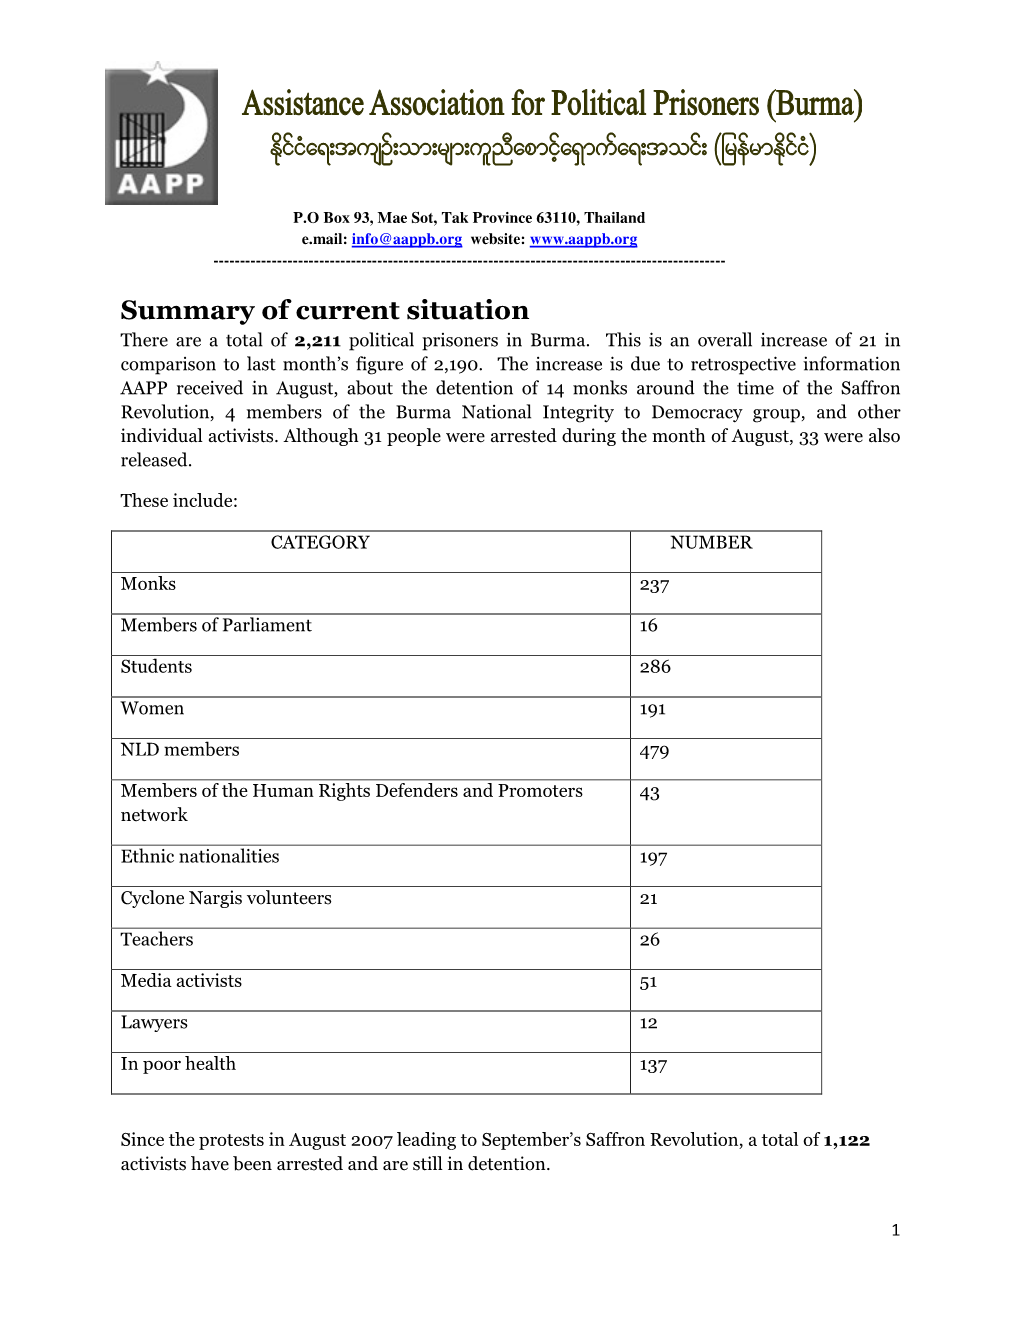 Monthly Chronology of Burma Political Prisoners for August 2009